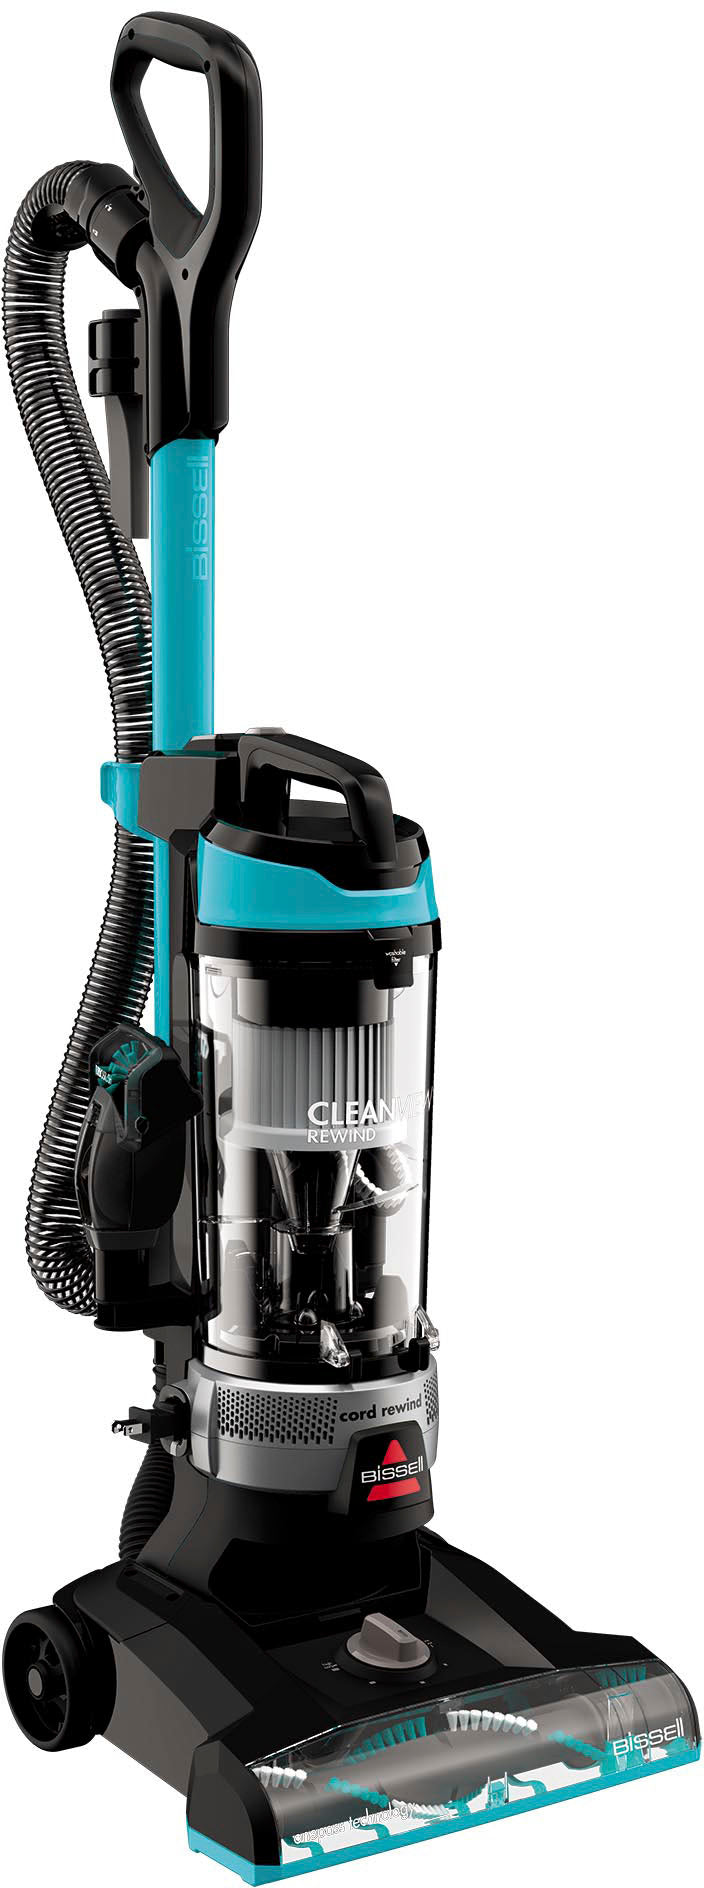 BISSELL - CleanView Rewind Upright Vacuum Cleaner - Black with Electric Blue accents_1